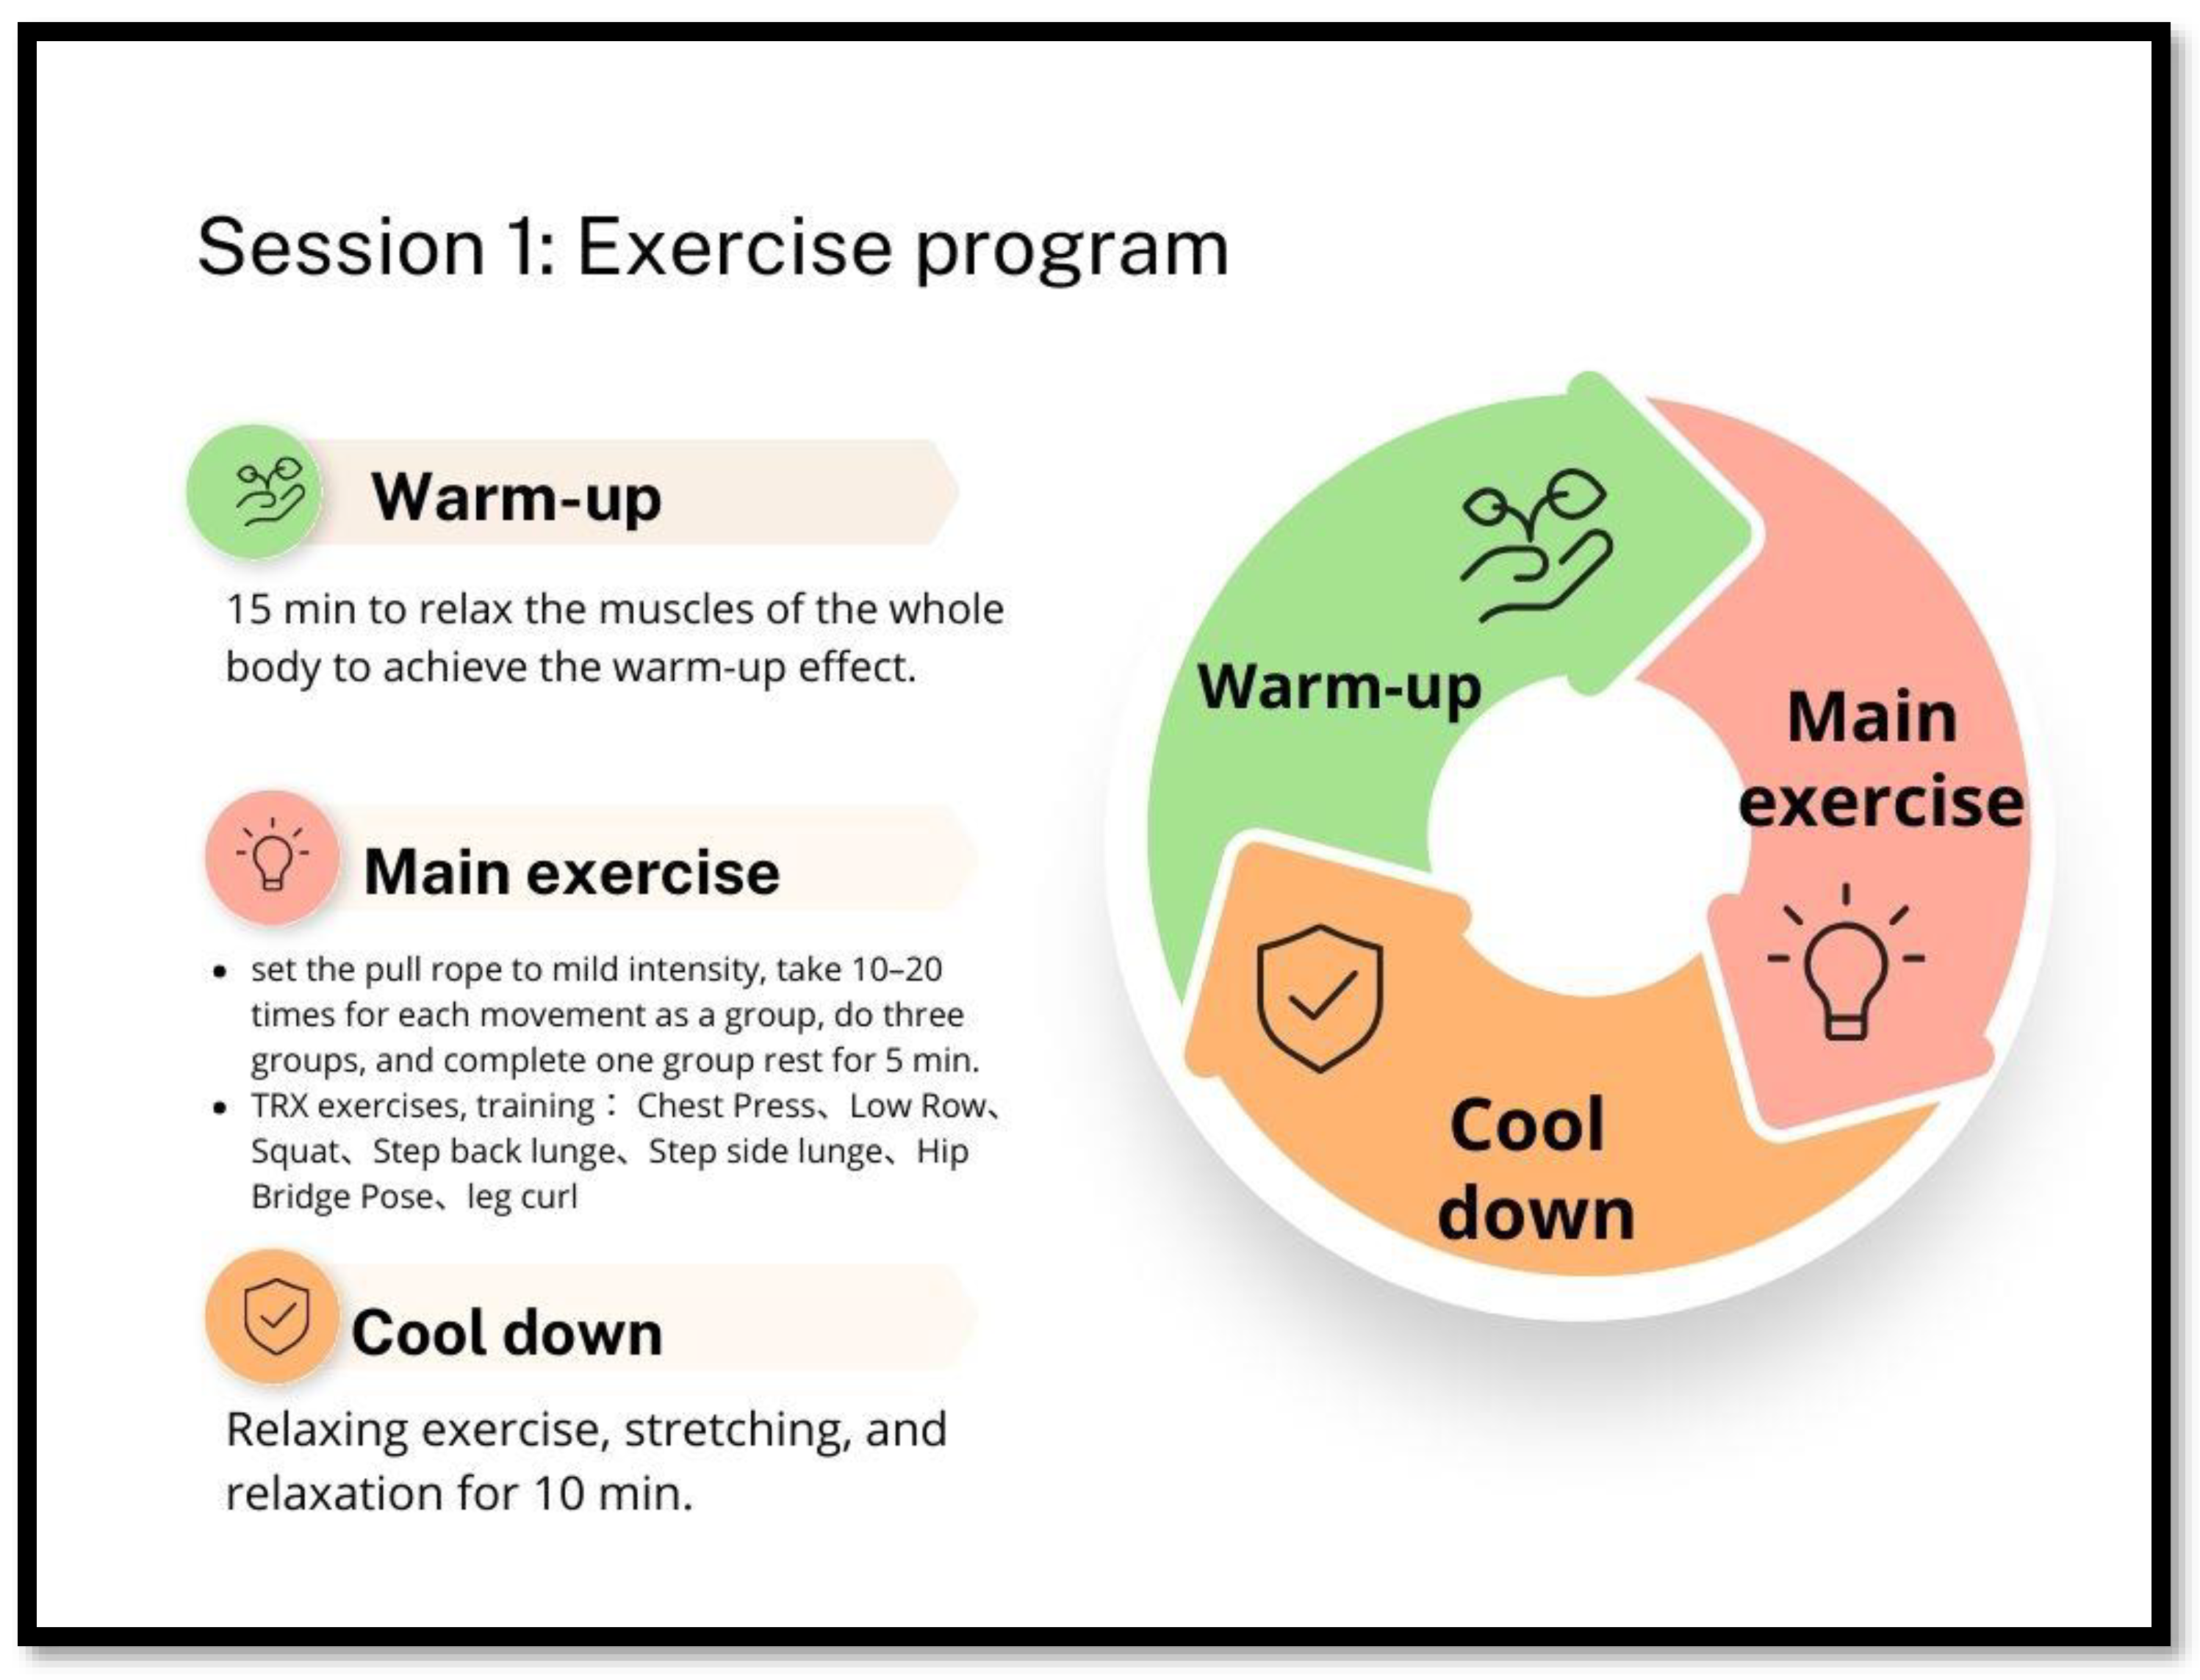 Examples of exercises with preventive content in warm-up.